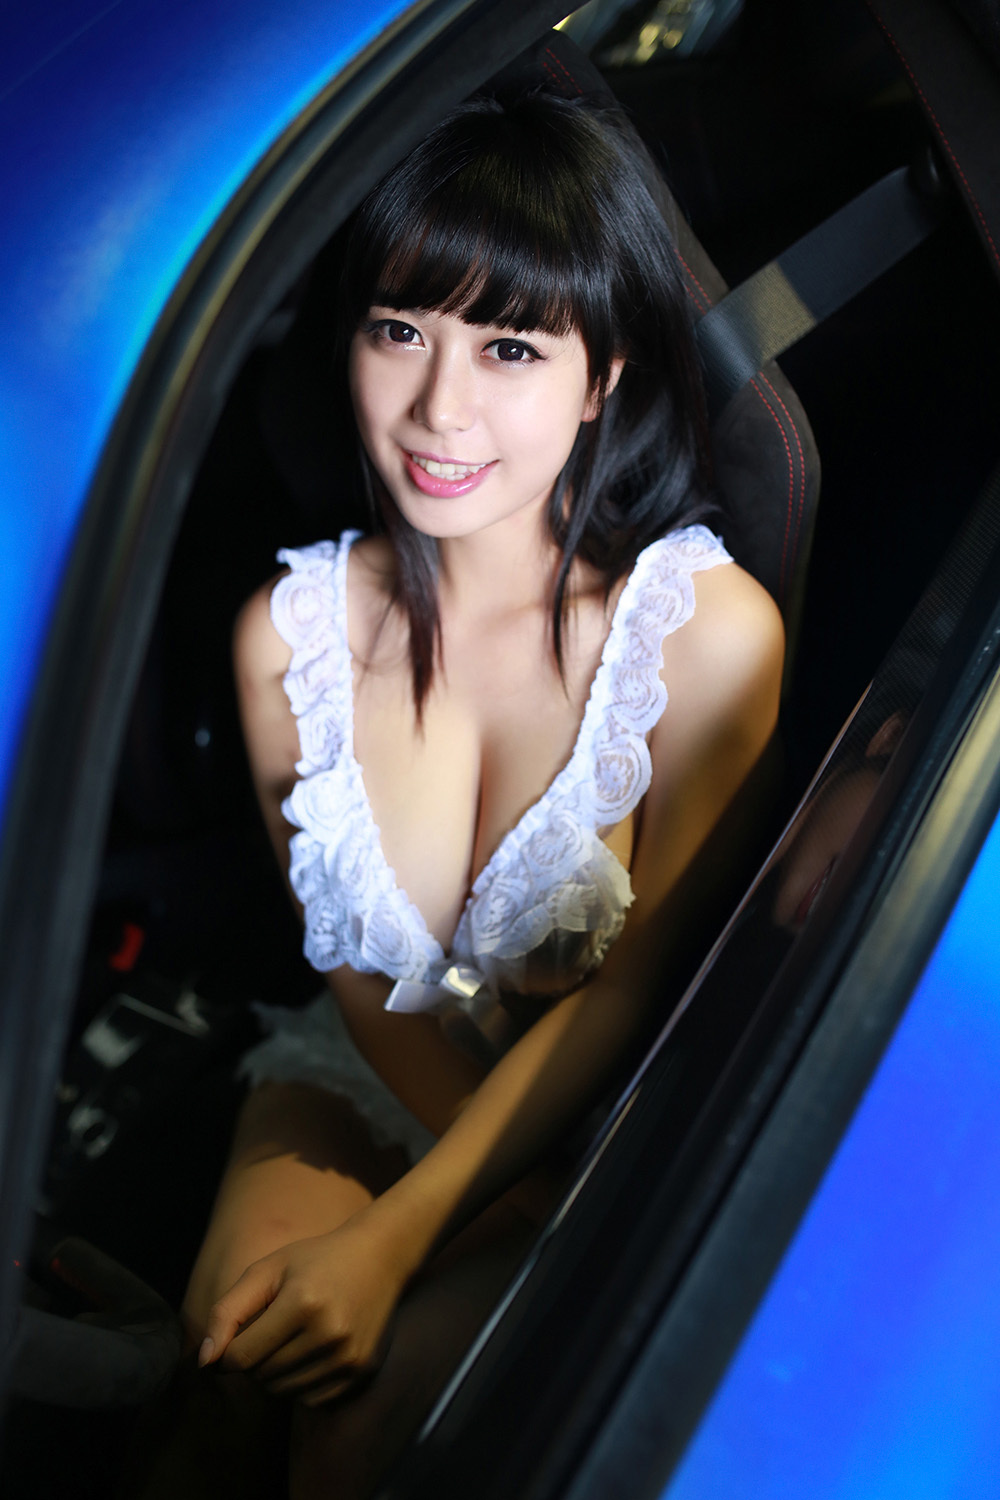 [mygirl Meiyuan Museum] no.017 - HuangKe - special appointment of Auto Beauty Workshop